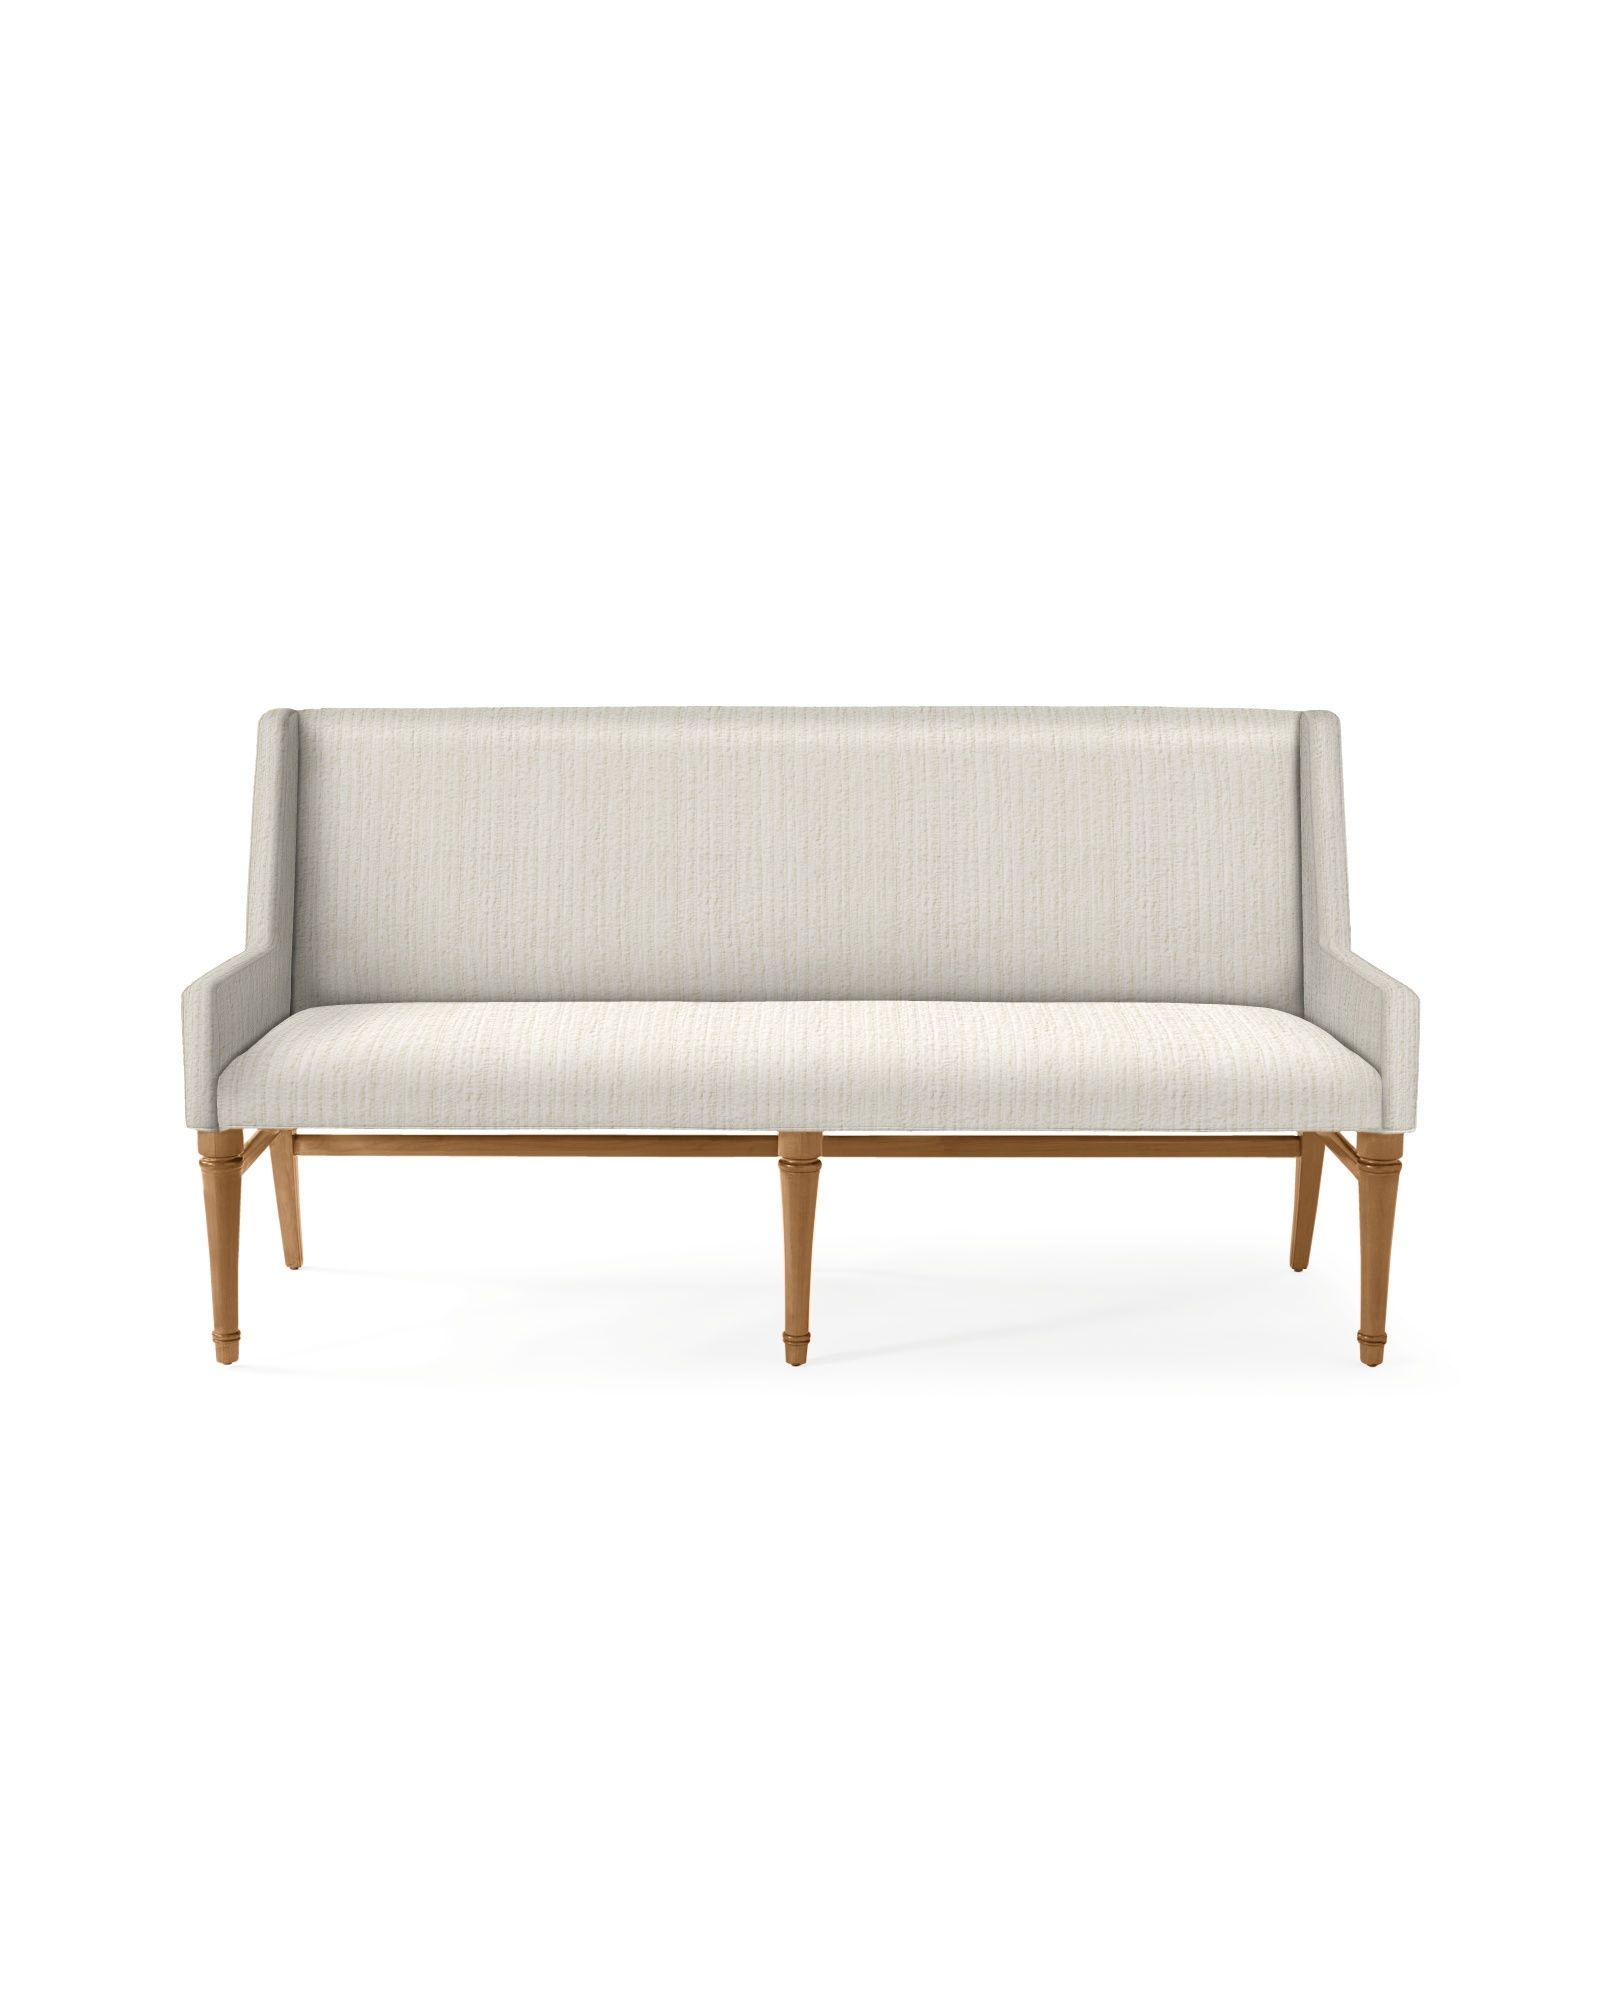 Eastgate Dining Bench | Serena and Lily